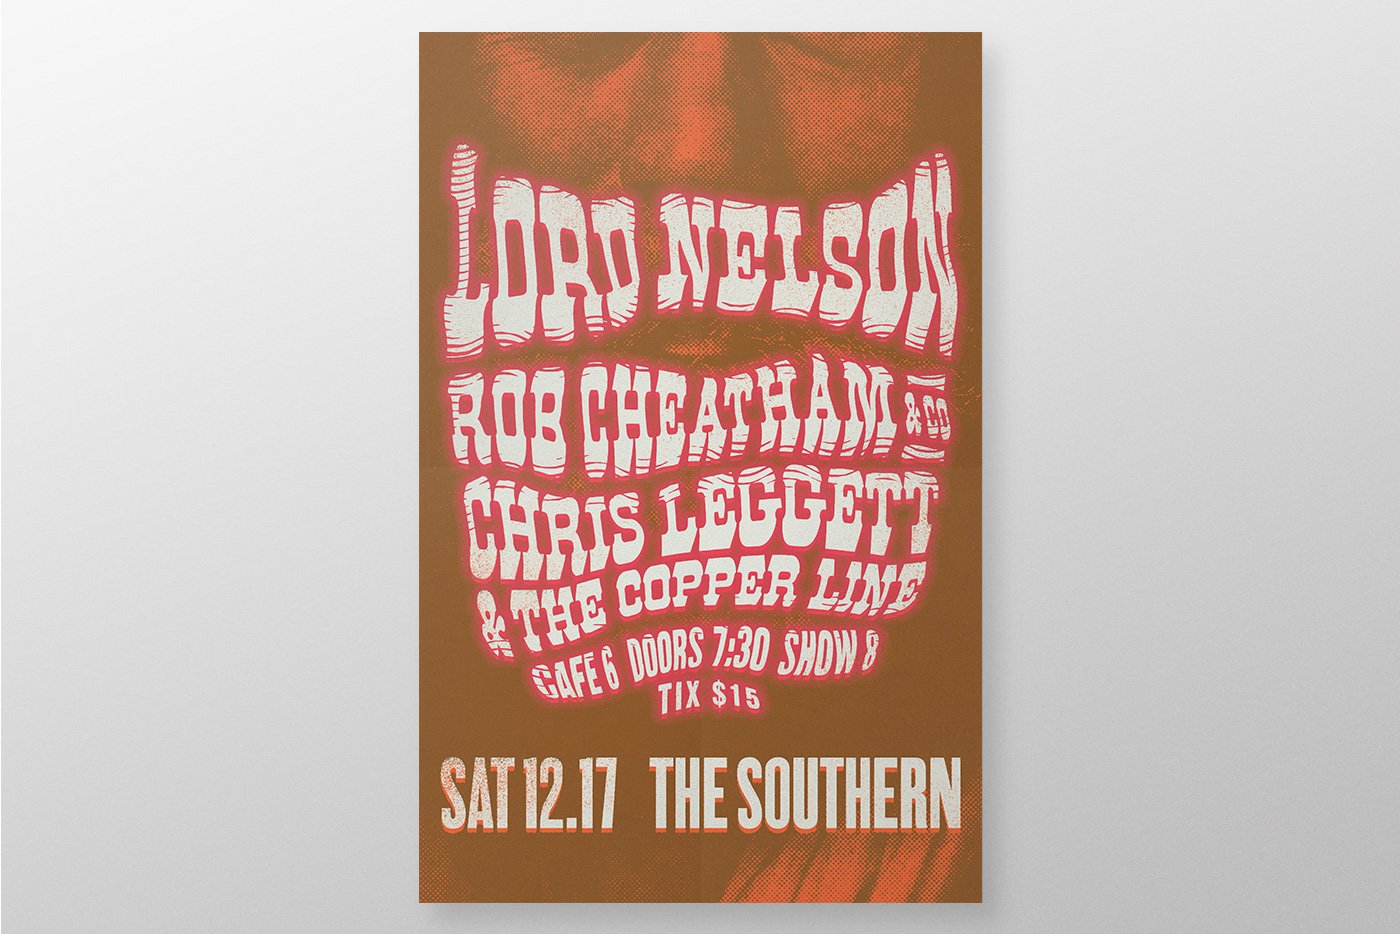 Lord Nelson Gig Poster